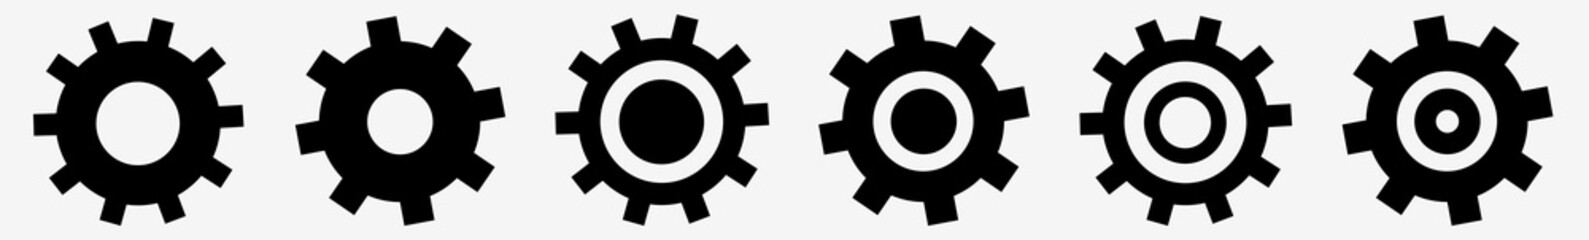 Gear Icon In Progress Gear Set | Gears Icon System Configuration Vector Illustration Logo | Technical Gear-Icon Isolated Gear Tech Collection